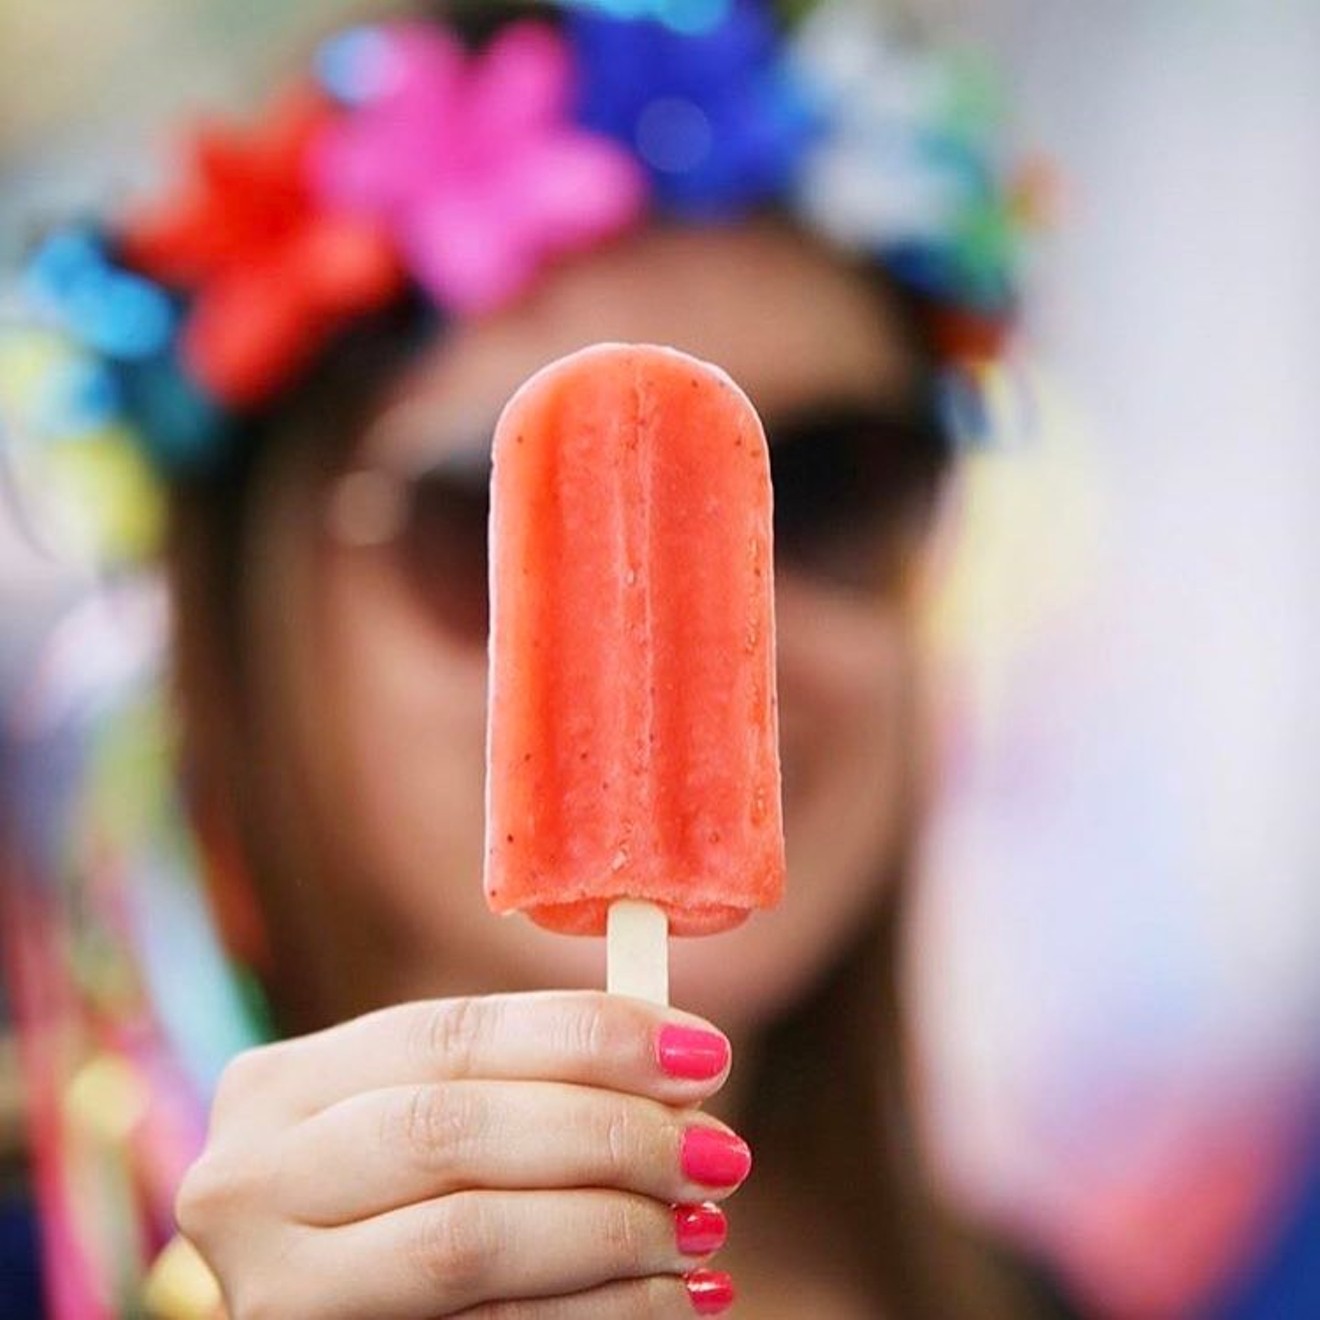 Boozy ice pops are the must-have Instagram pic accessory of summer 2017. We Googled it.